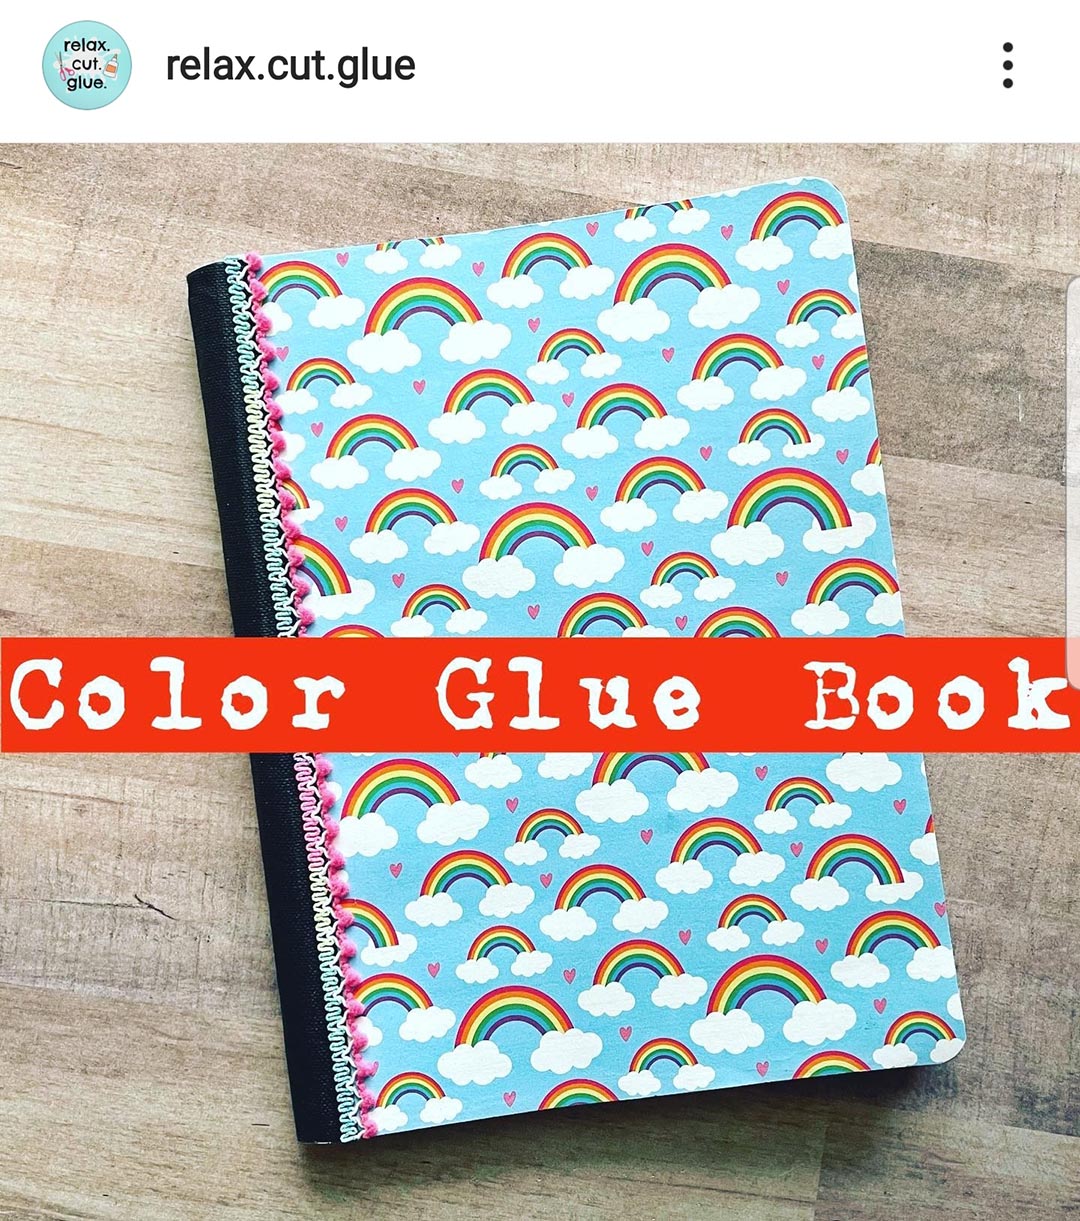 Color Glue Book by Relax.Cut.Glue on Instagram